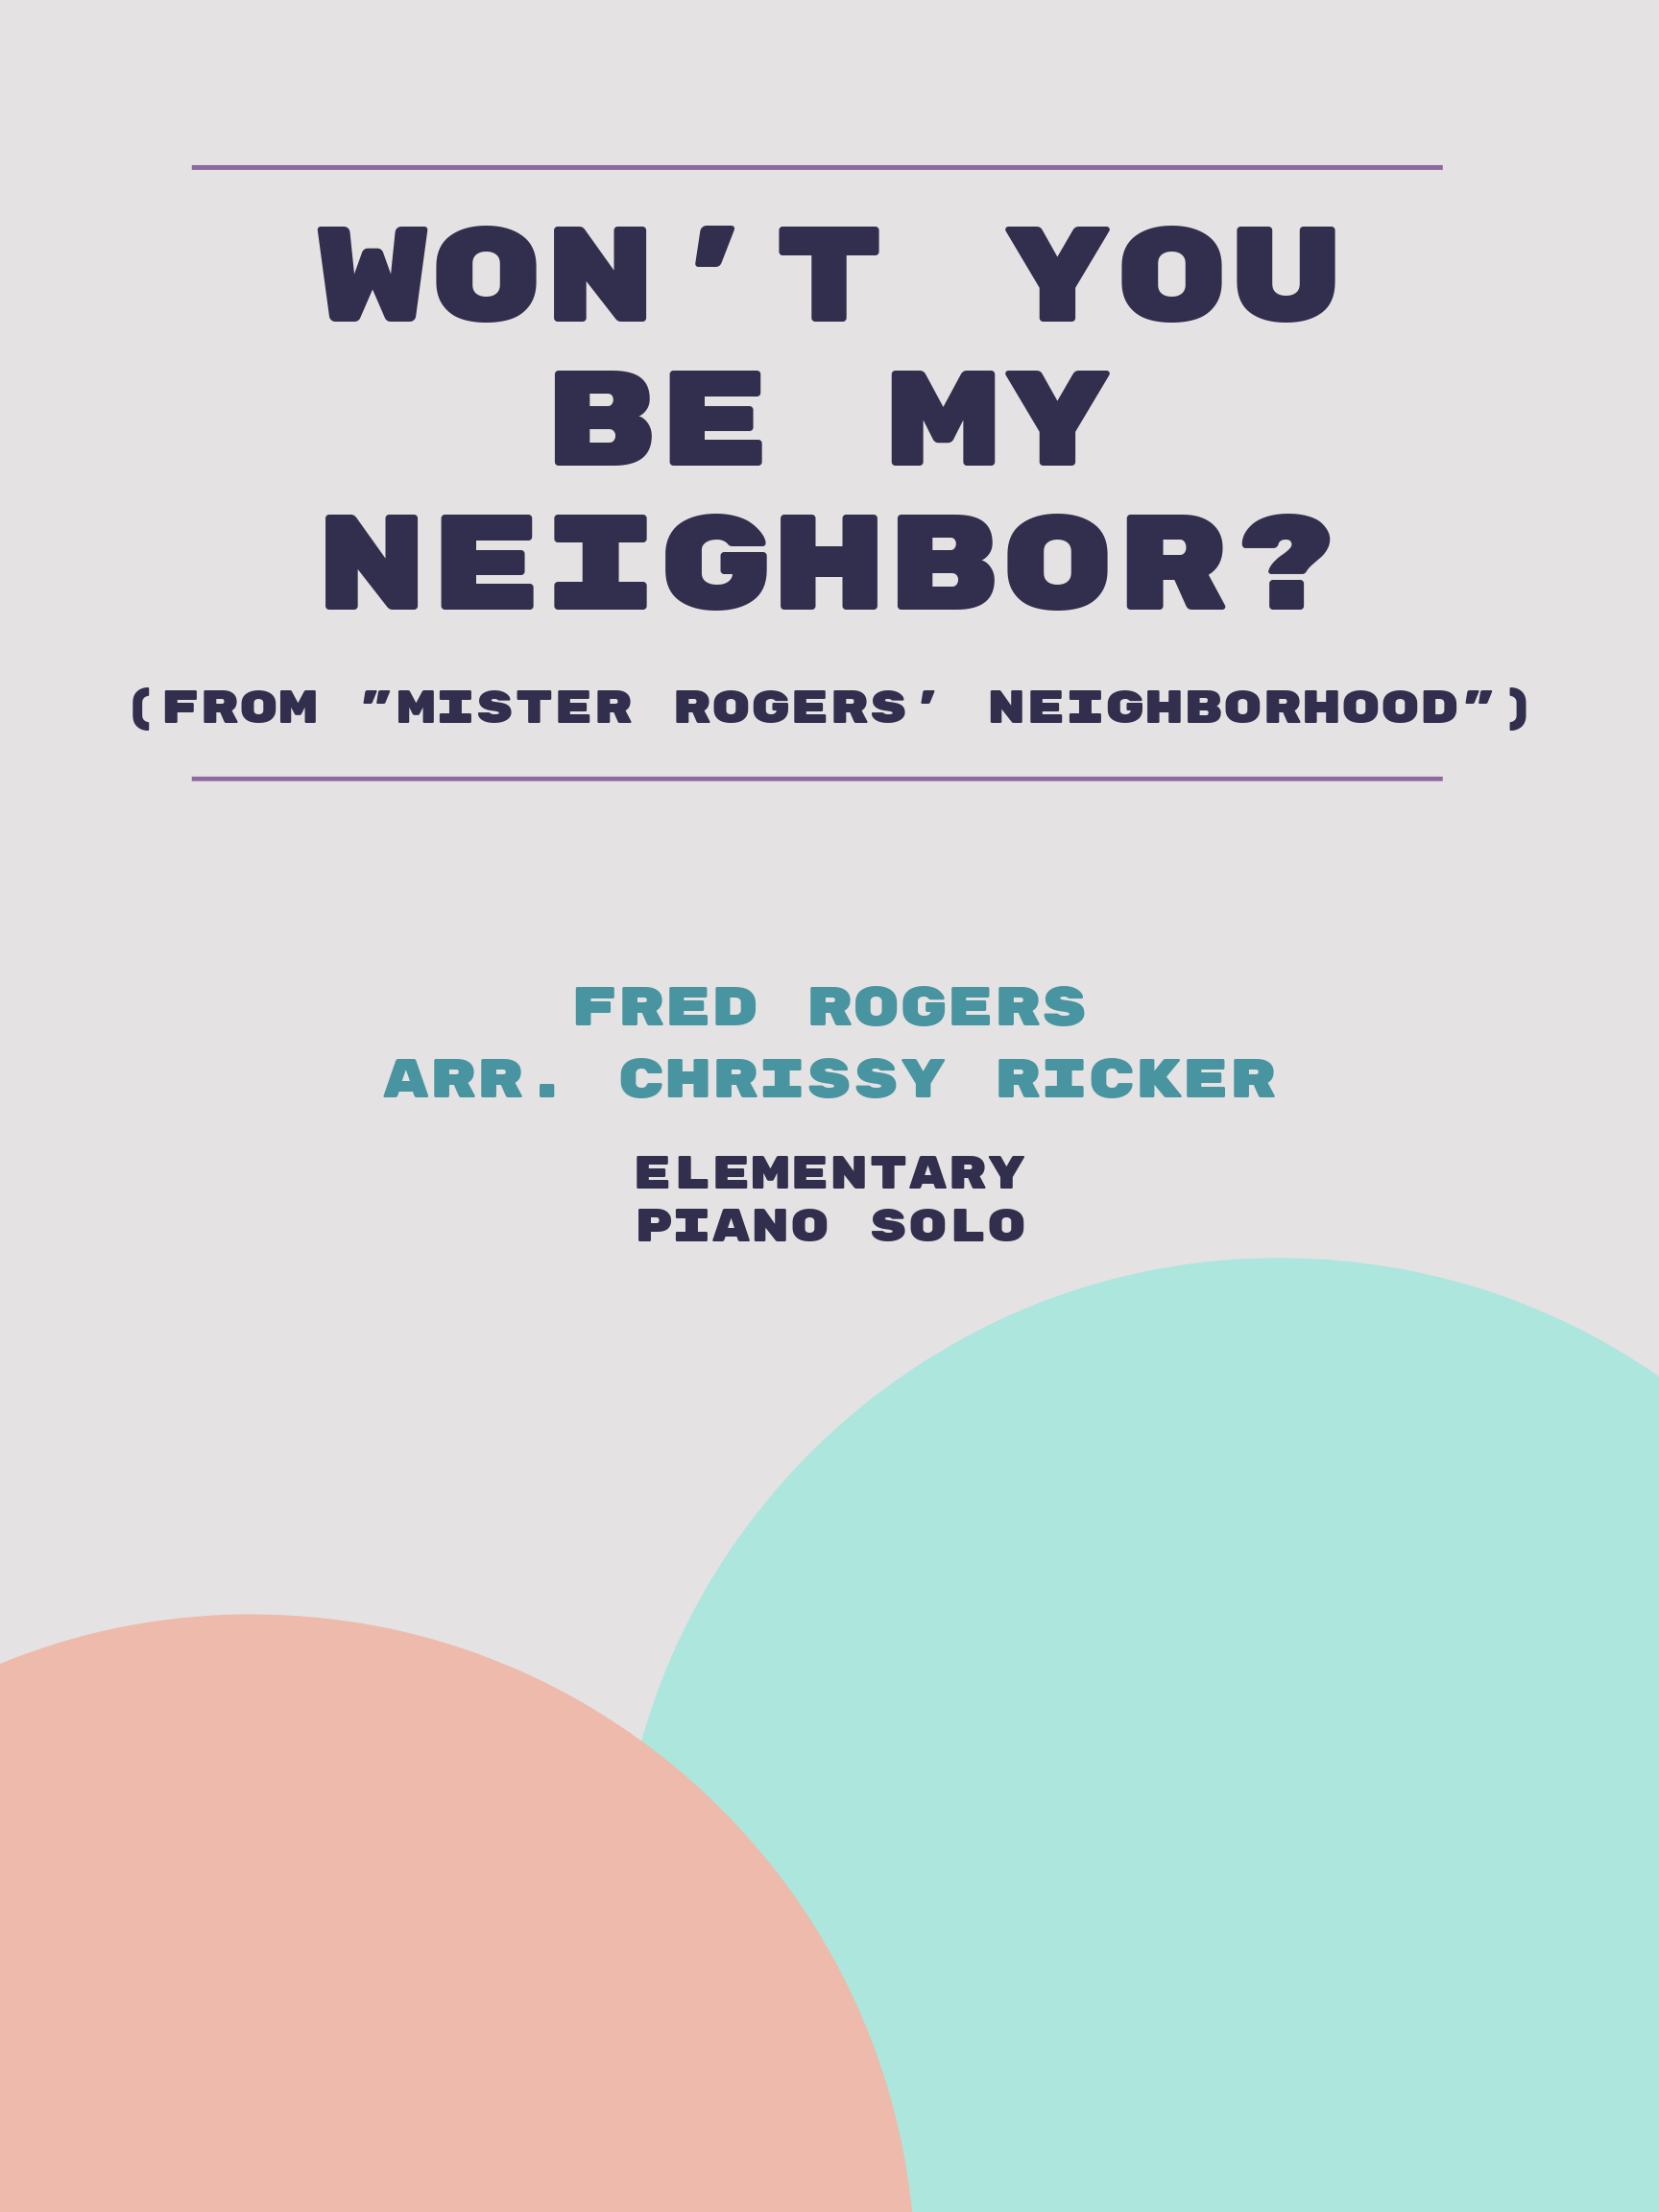 Won't You Be My Neighbor? by Fred Rogers